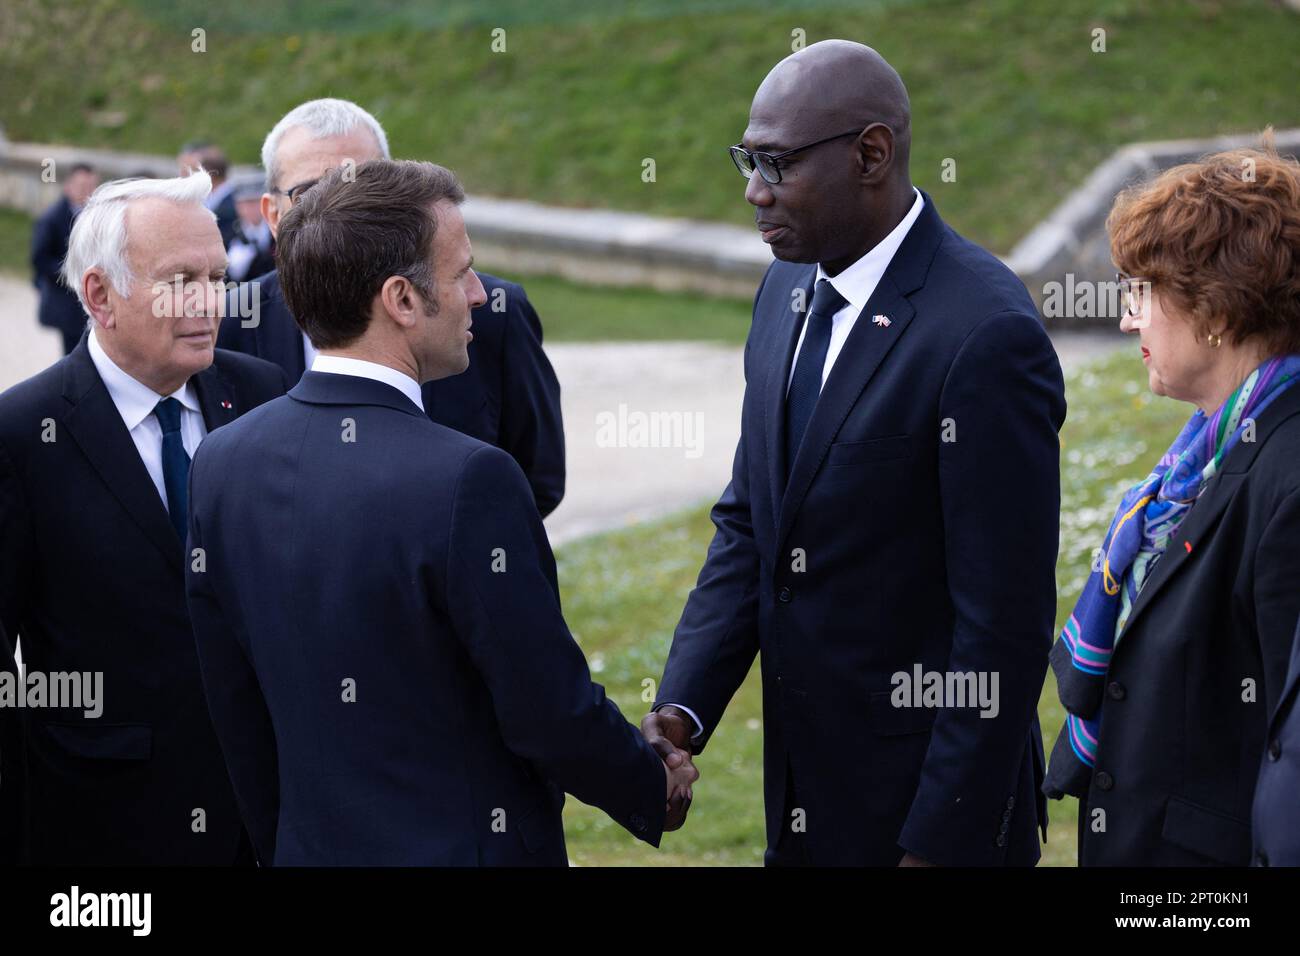 French President Emmanuel Macron shakes hand with Haitian Ambassador to  France Jean Josue Pierre Dahomey next to former prime minister Jean-Marc  Ayrault visits the Chateau de Joux during a ceremony marking the